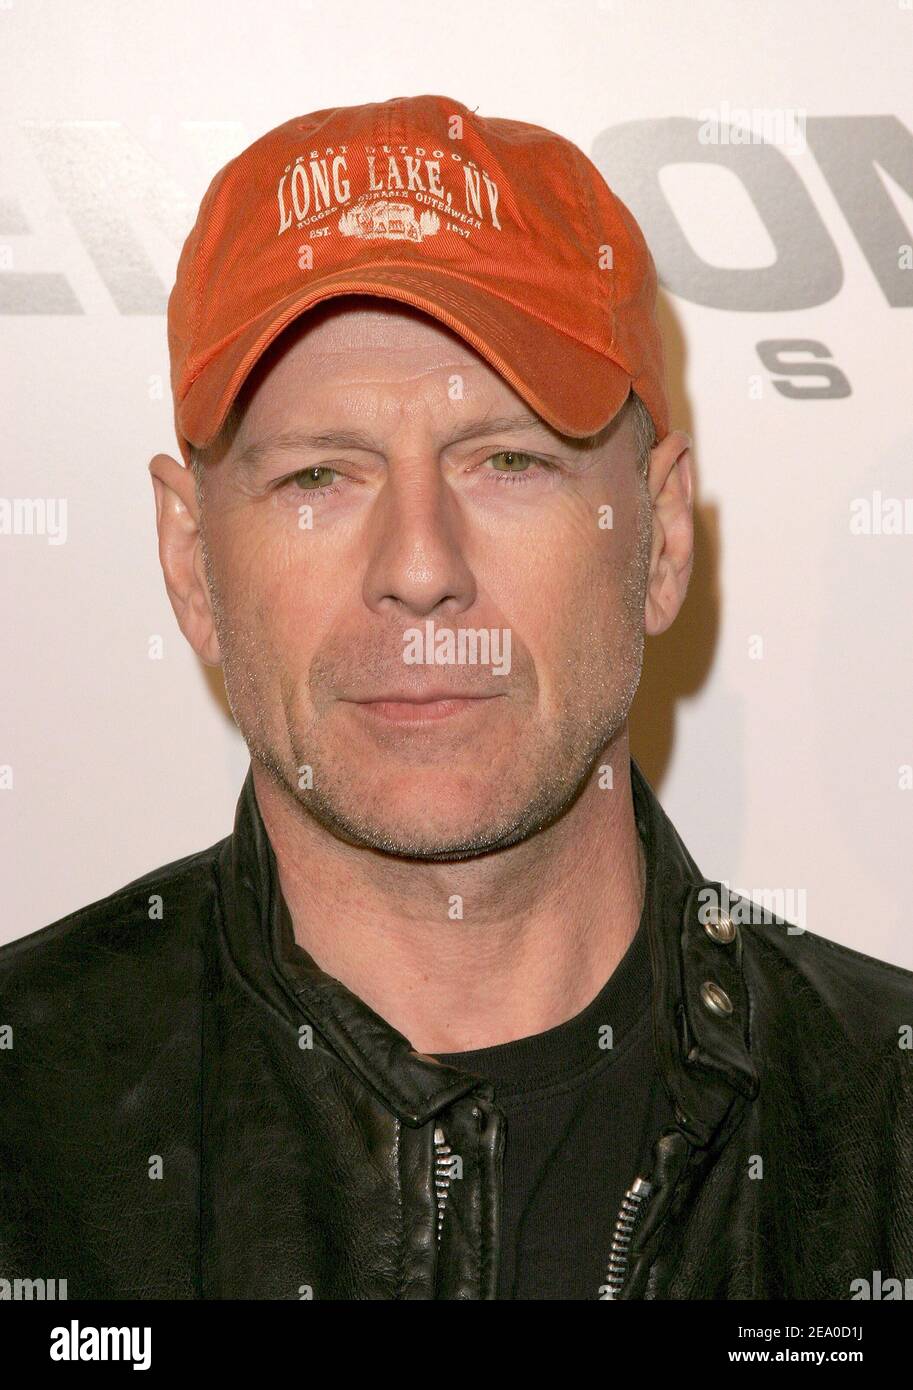 Cast member Bruce Willis attends the world premiere of the Dimension Films release 'Sin City' held at the Mann National Theater in Westwood, CA, USA, on March 28, 2005. Photo by Amanda Parks/ABACA. Stock Photo